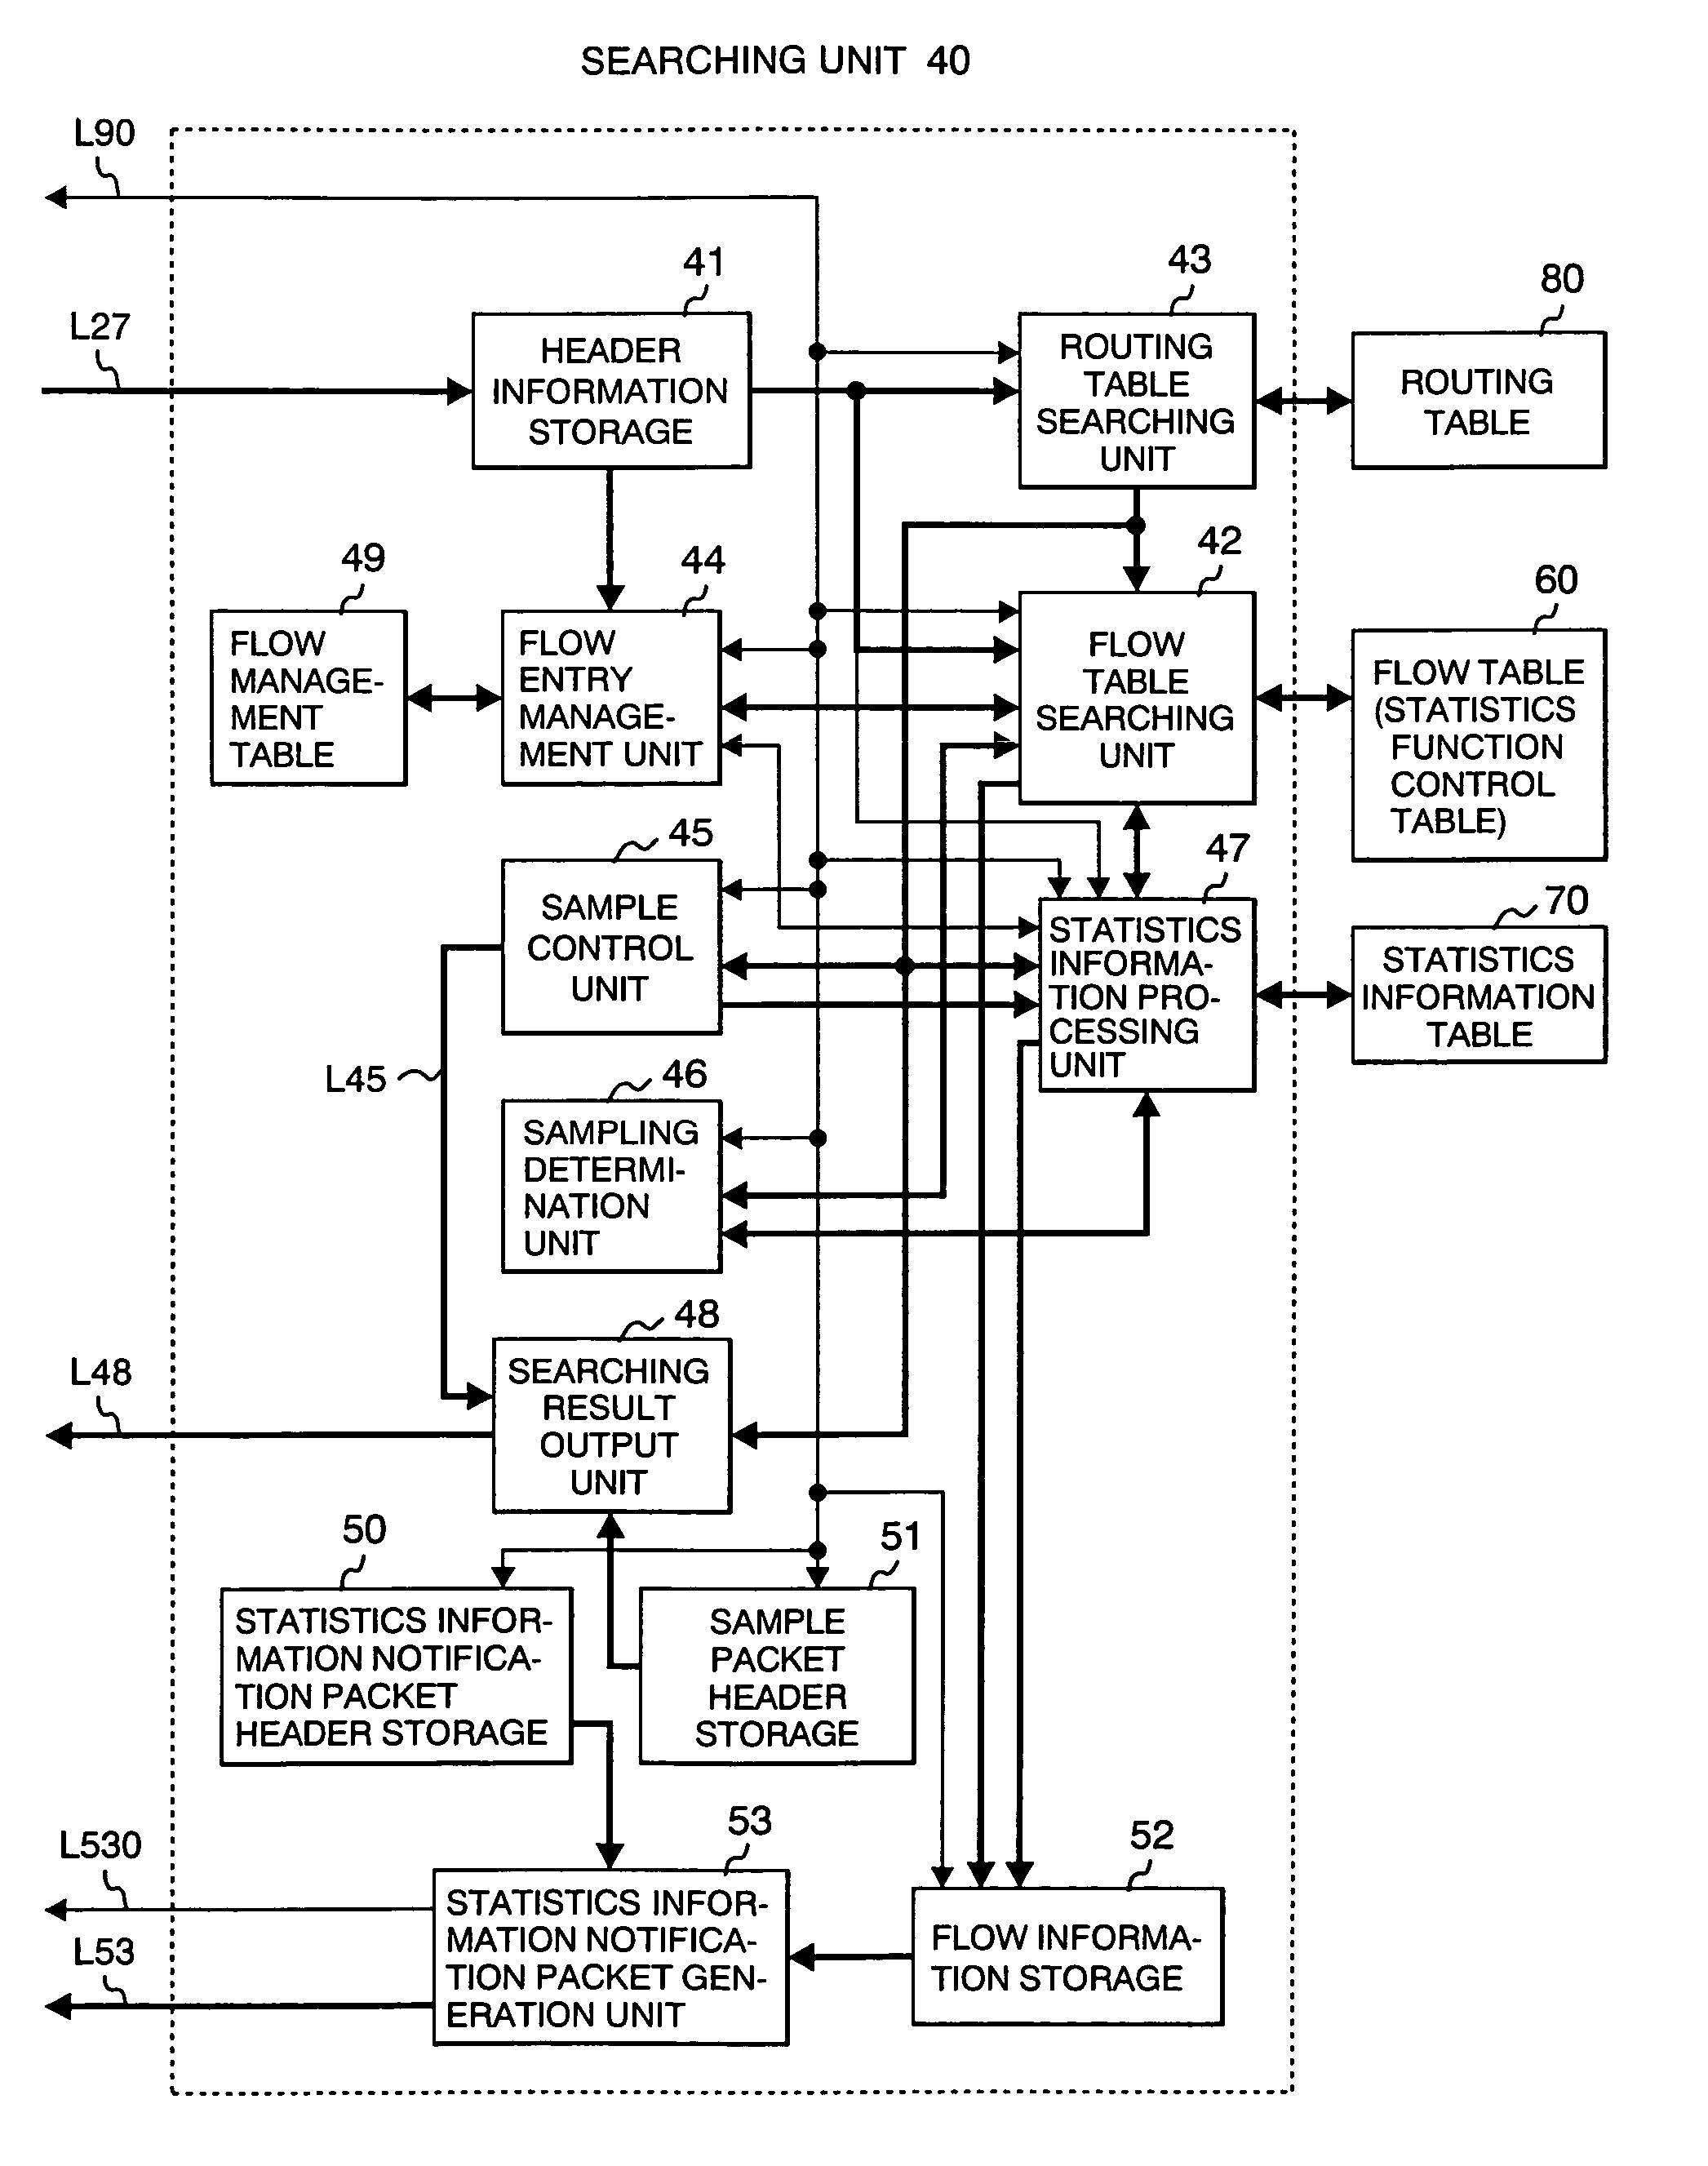 Communication statistic information collection apparatus